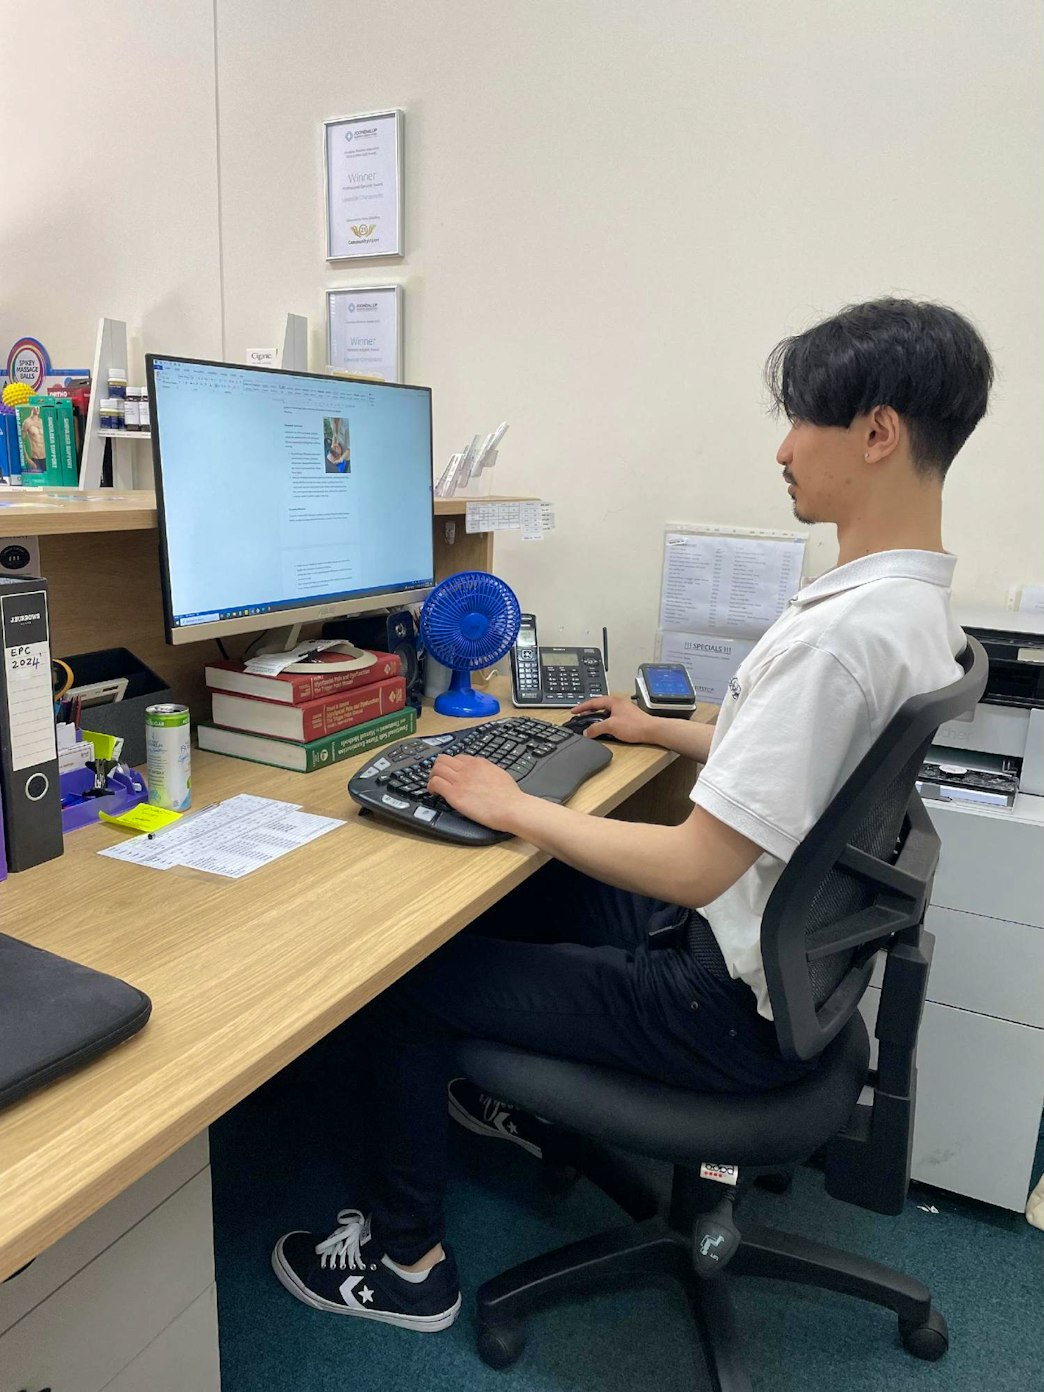 Example of good posture while working at computer